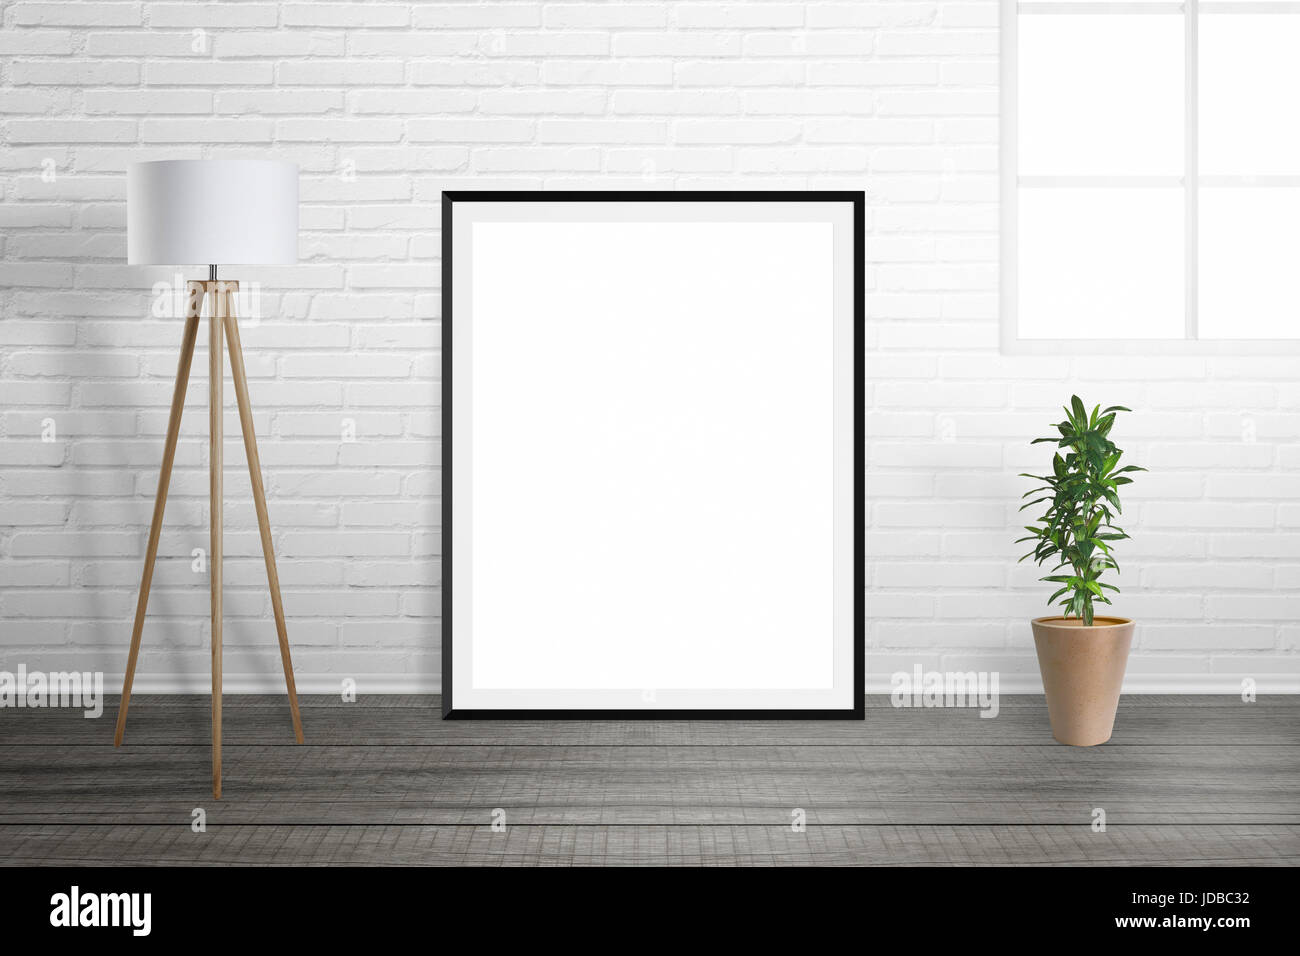 Poster frame mockup. Room interior with lamp and plant. Brick wall and window in background. Stock Photo